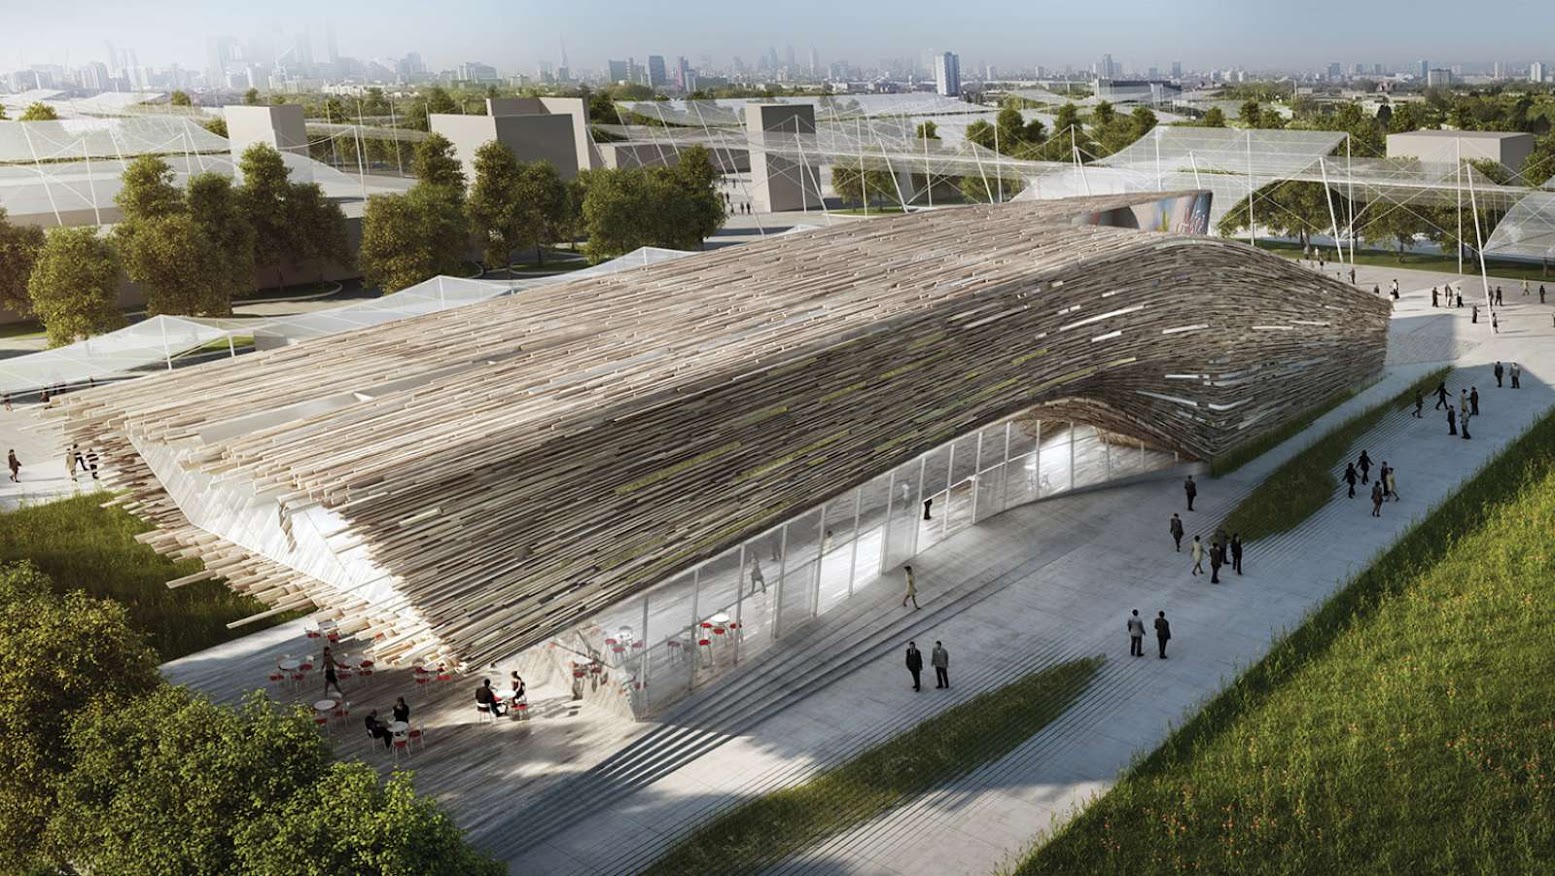 Milano, Italia: [AUSTRIAN PAVILION EXPO 2015 BY BENCE PAP AND MARIO GASSER]